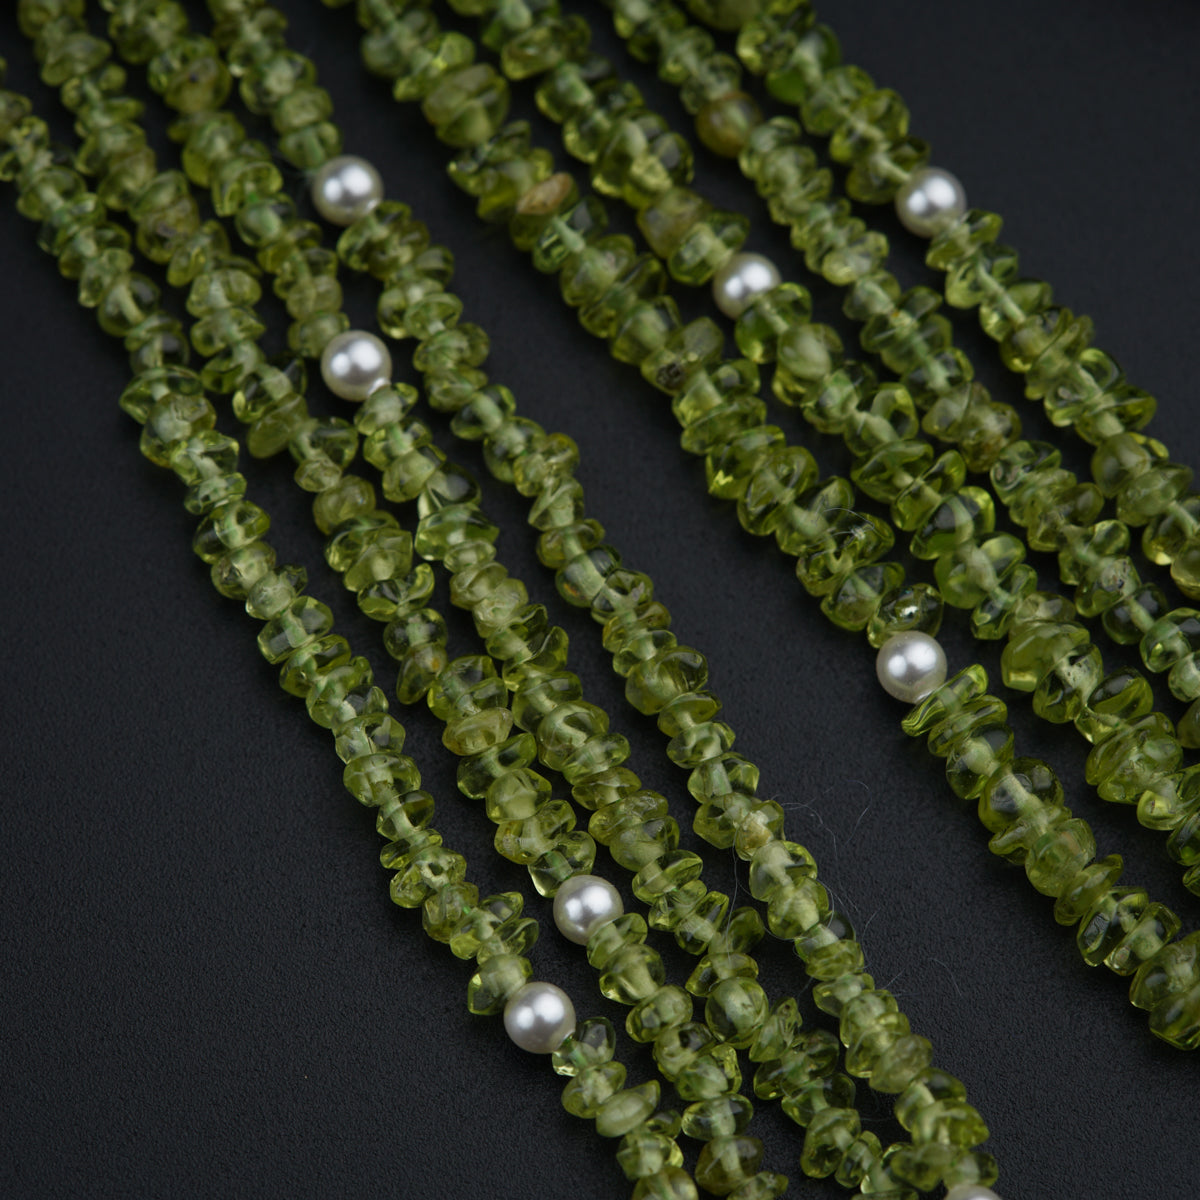 a close up of a string of green beads